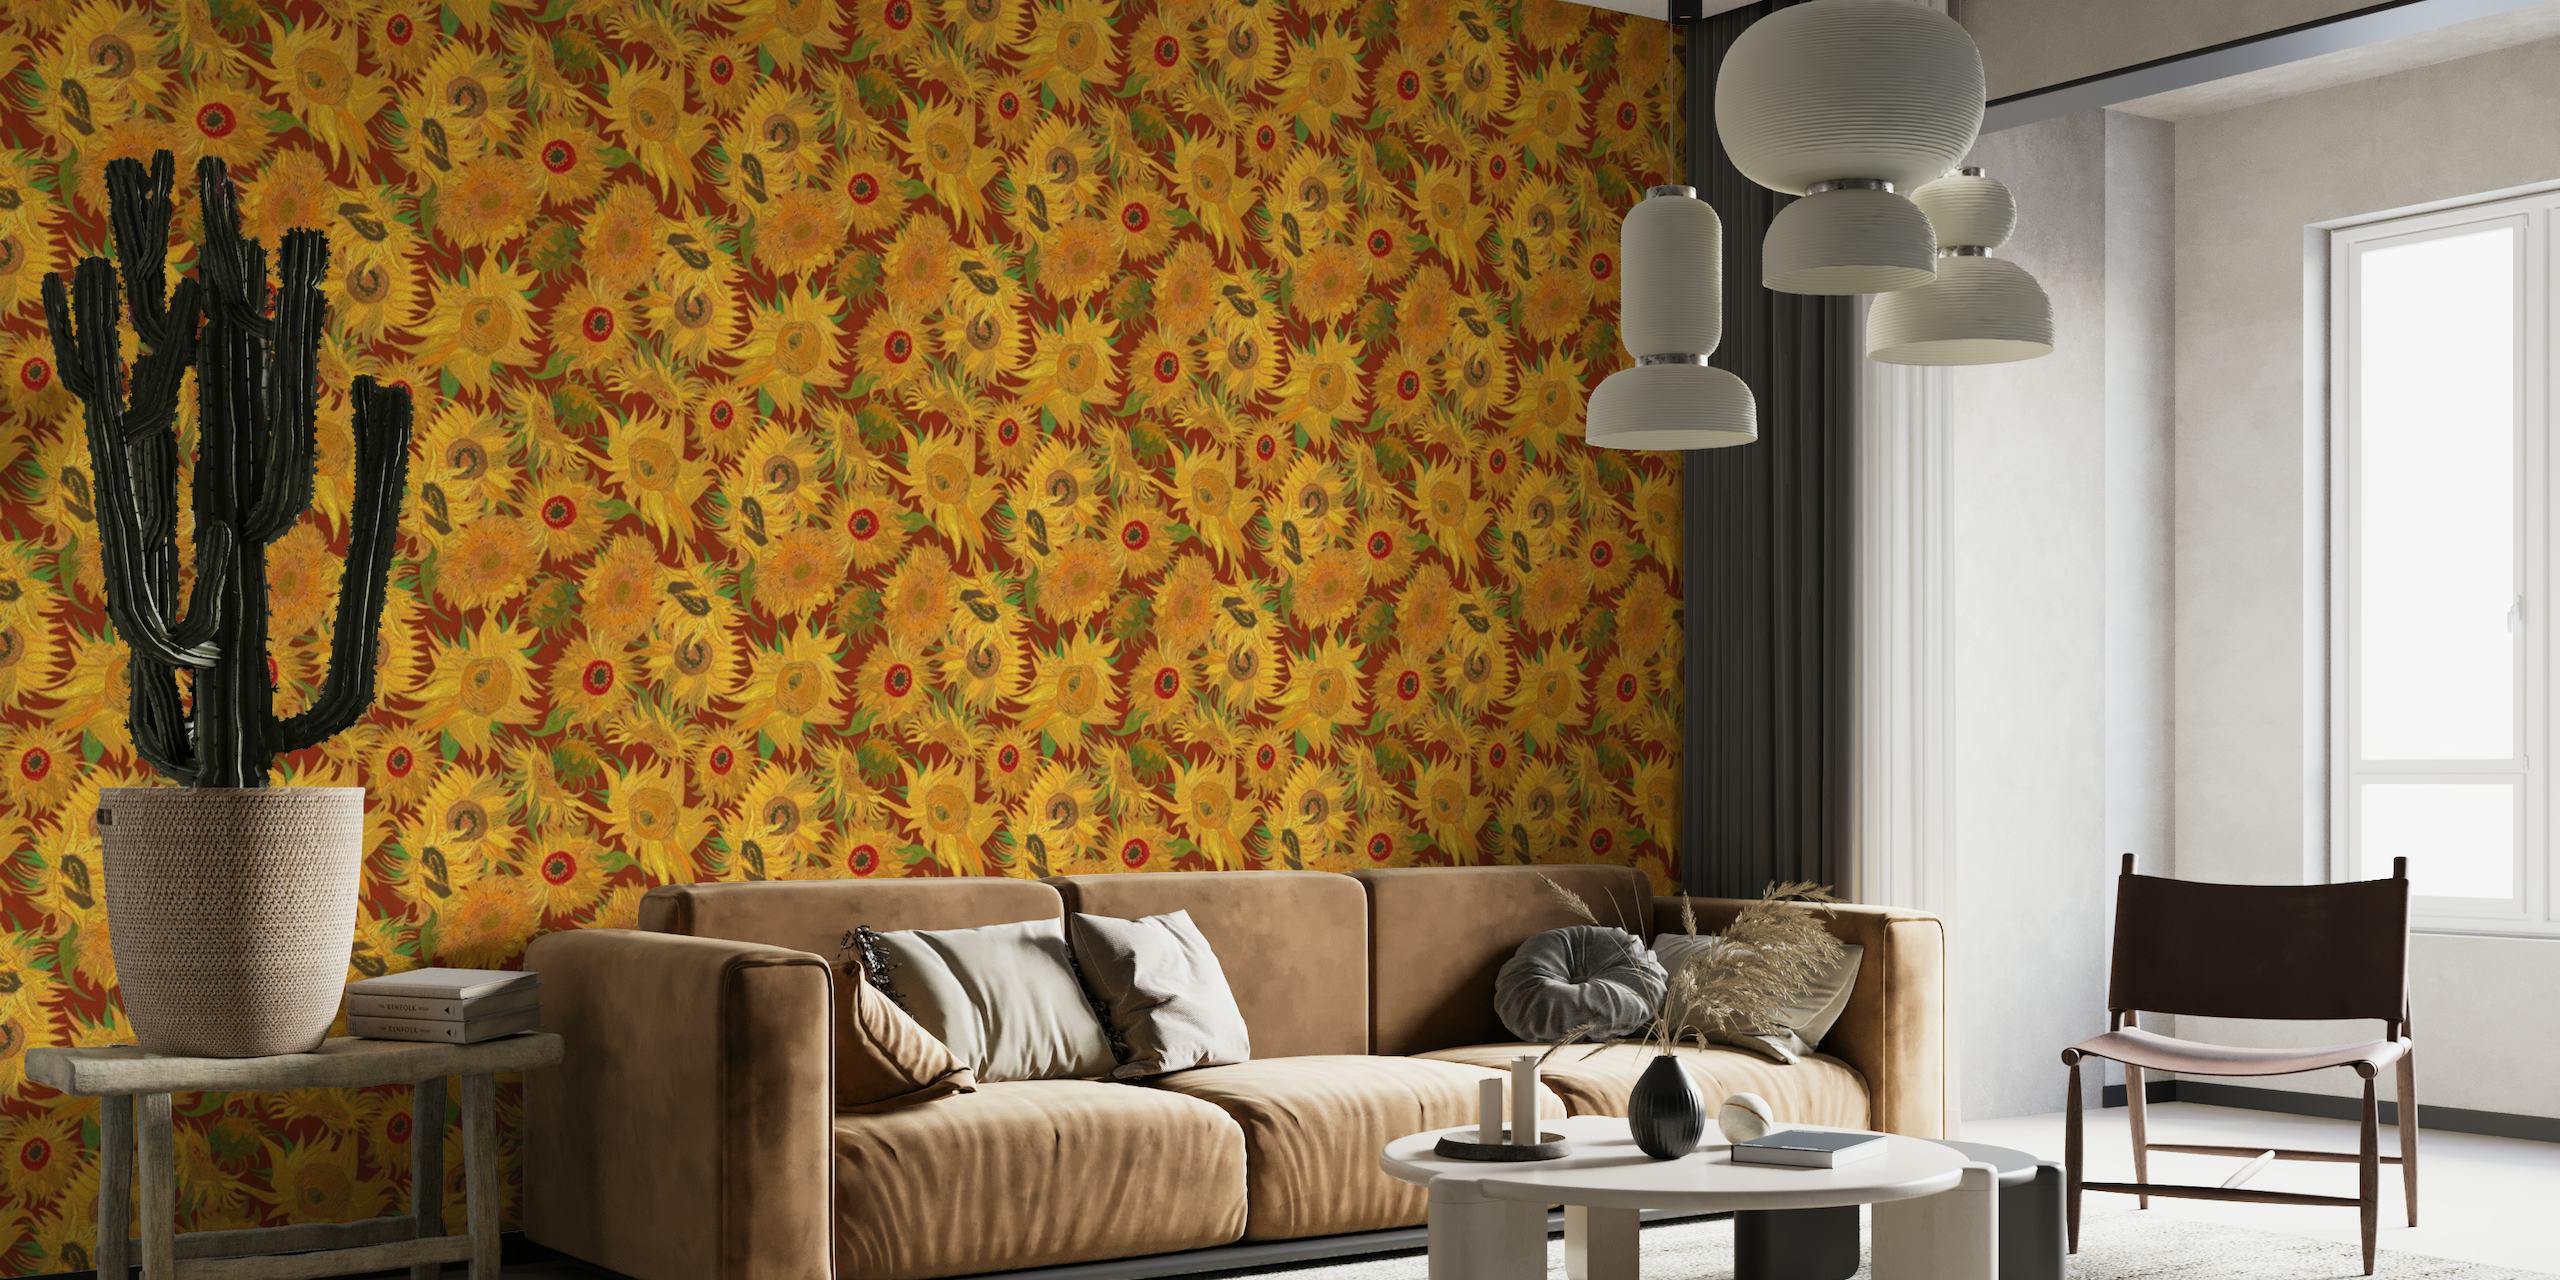 Van Gogh Sunflowers Pattern in yellow, green and burgundy red tapet